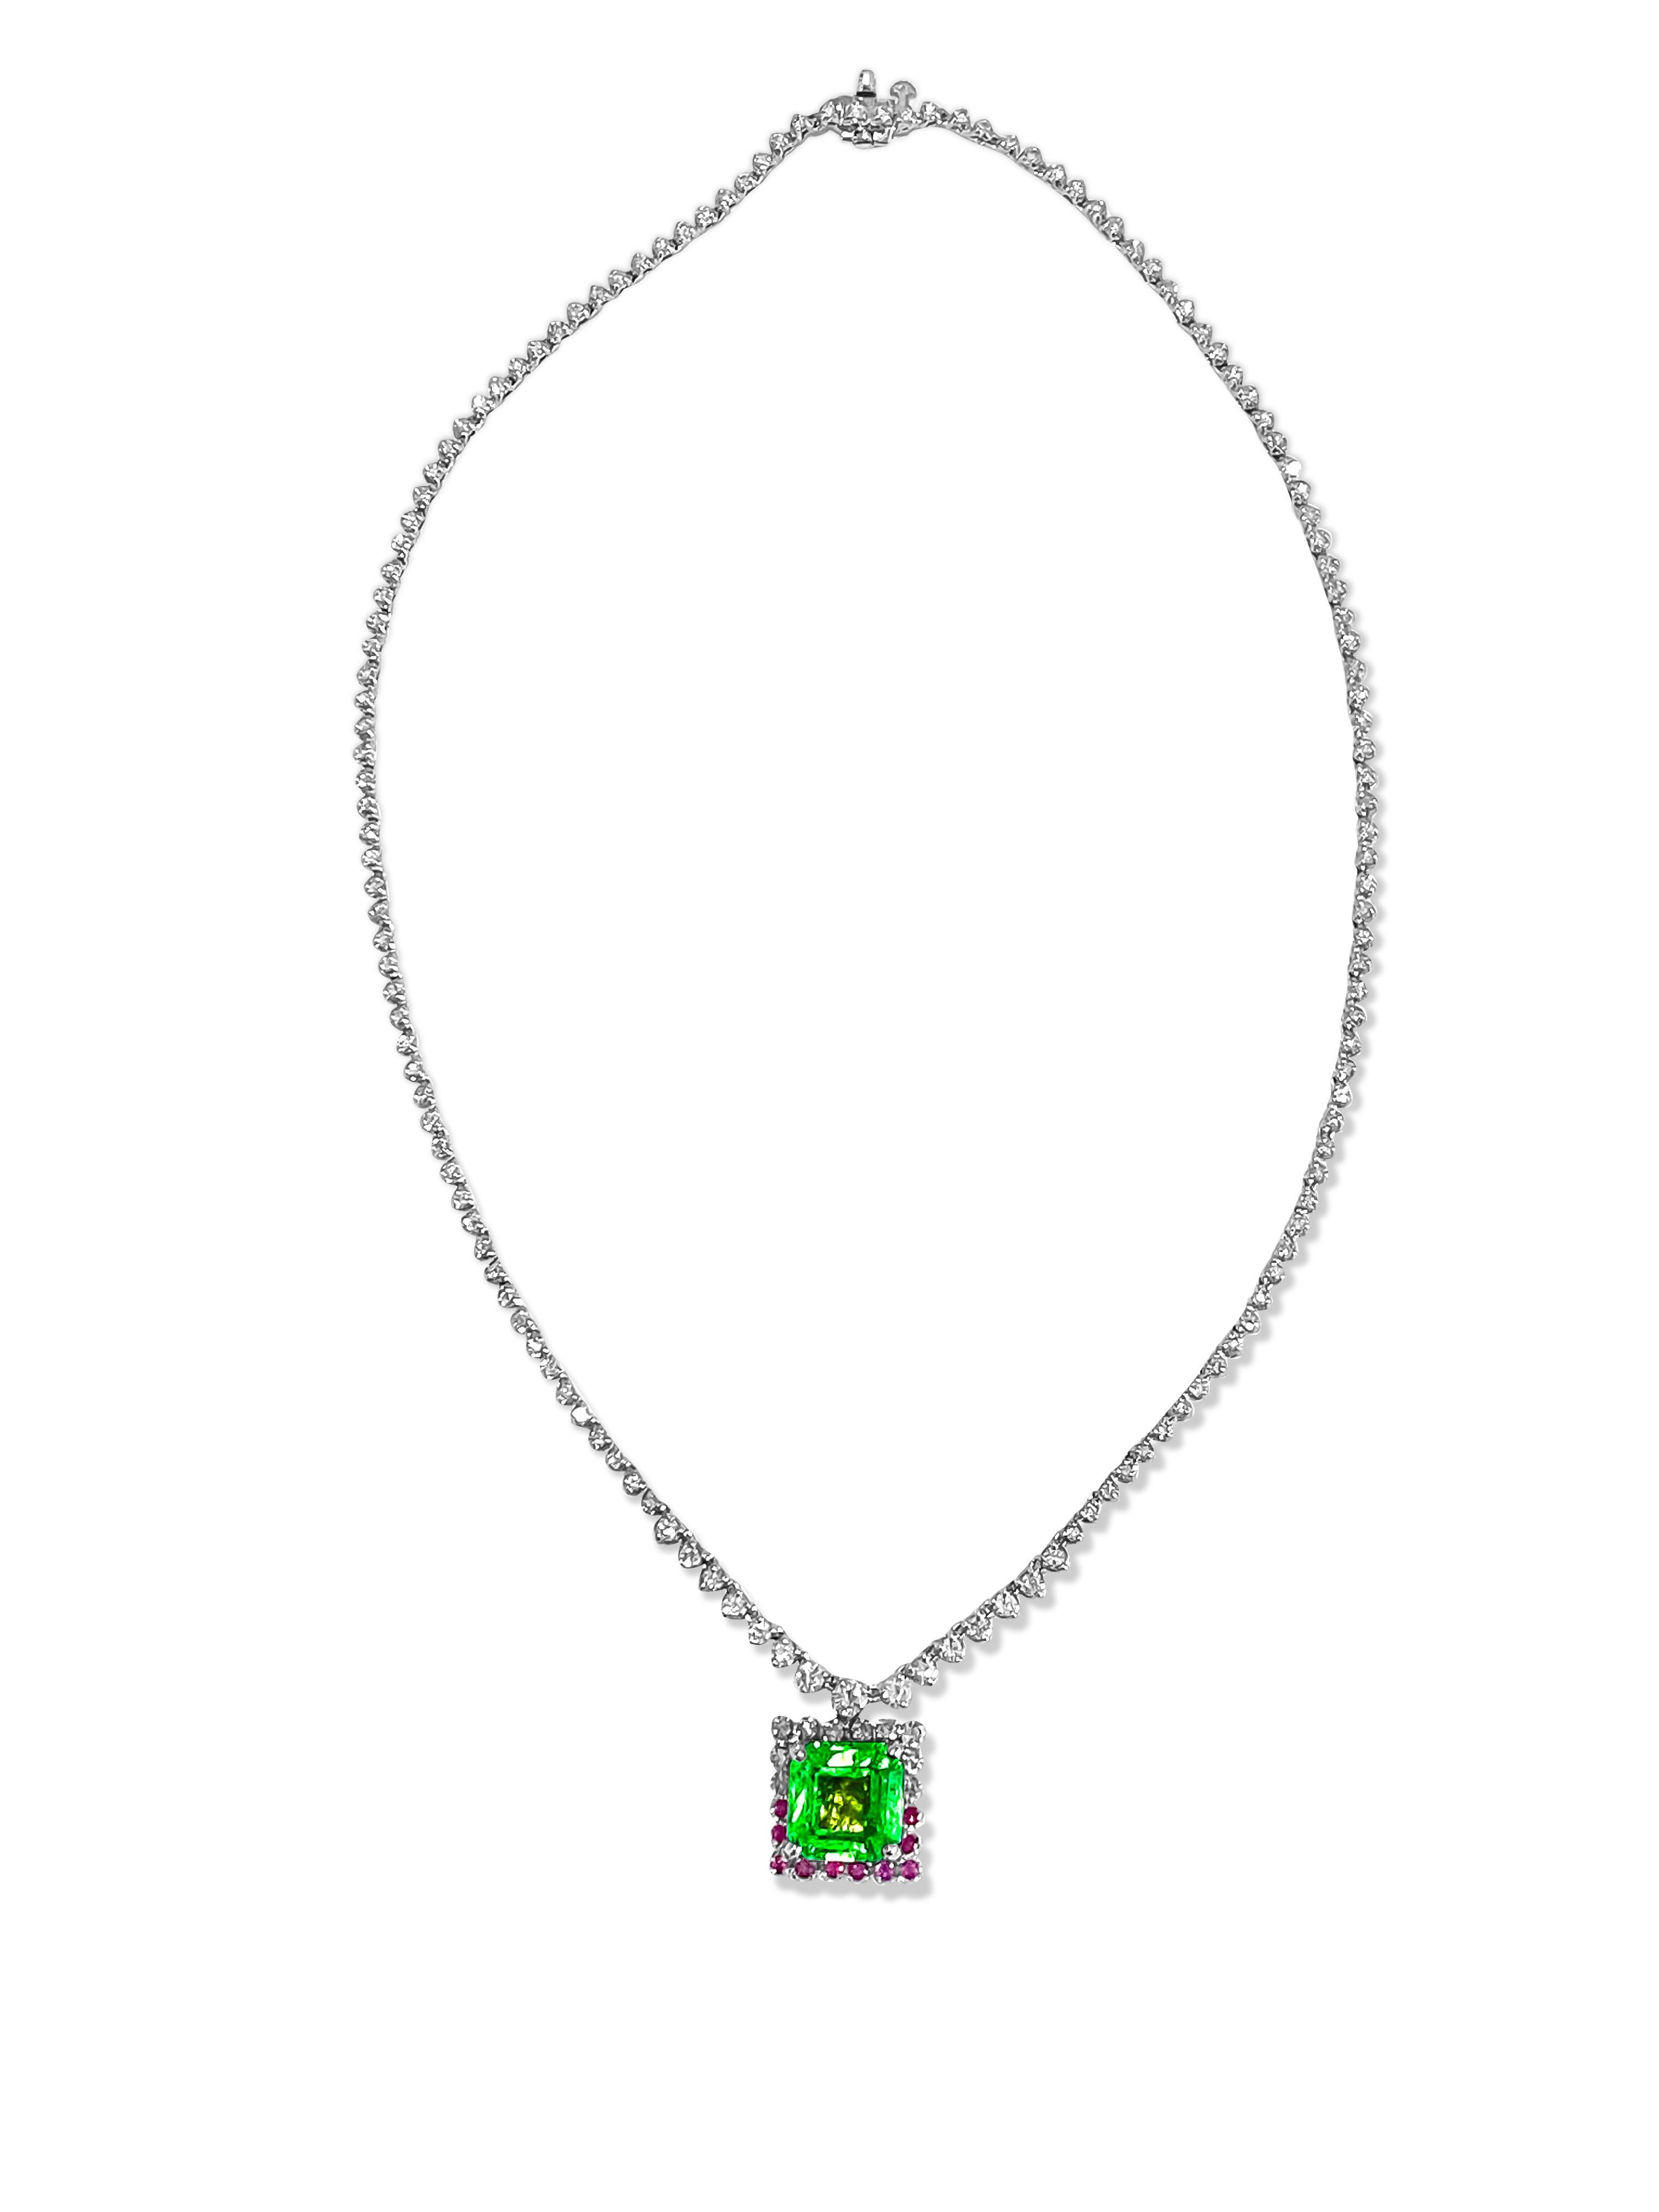 Metal: 14K White Gold. 
5.50 Carat, 100% natural earth mined Colombian Emerald. Emerald cut emerald.

5.00 carat diamonds total. SI Clarity and G color diamonds. Round brilliant cut. 100% natural earth mined.

0.50 Carat natural Burma ruby. 100%